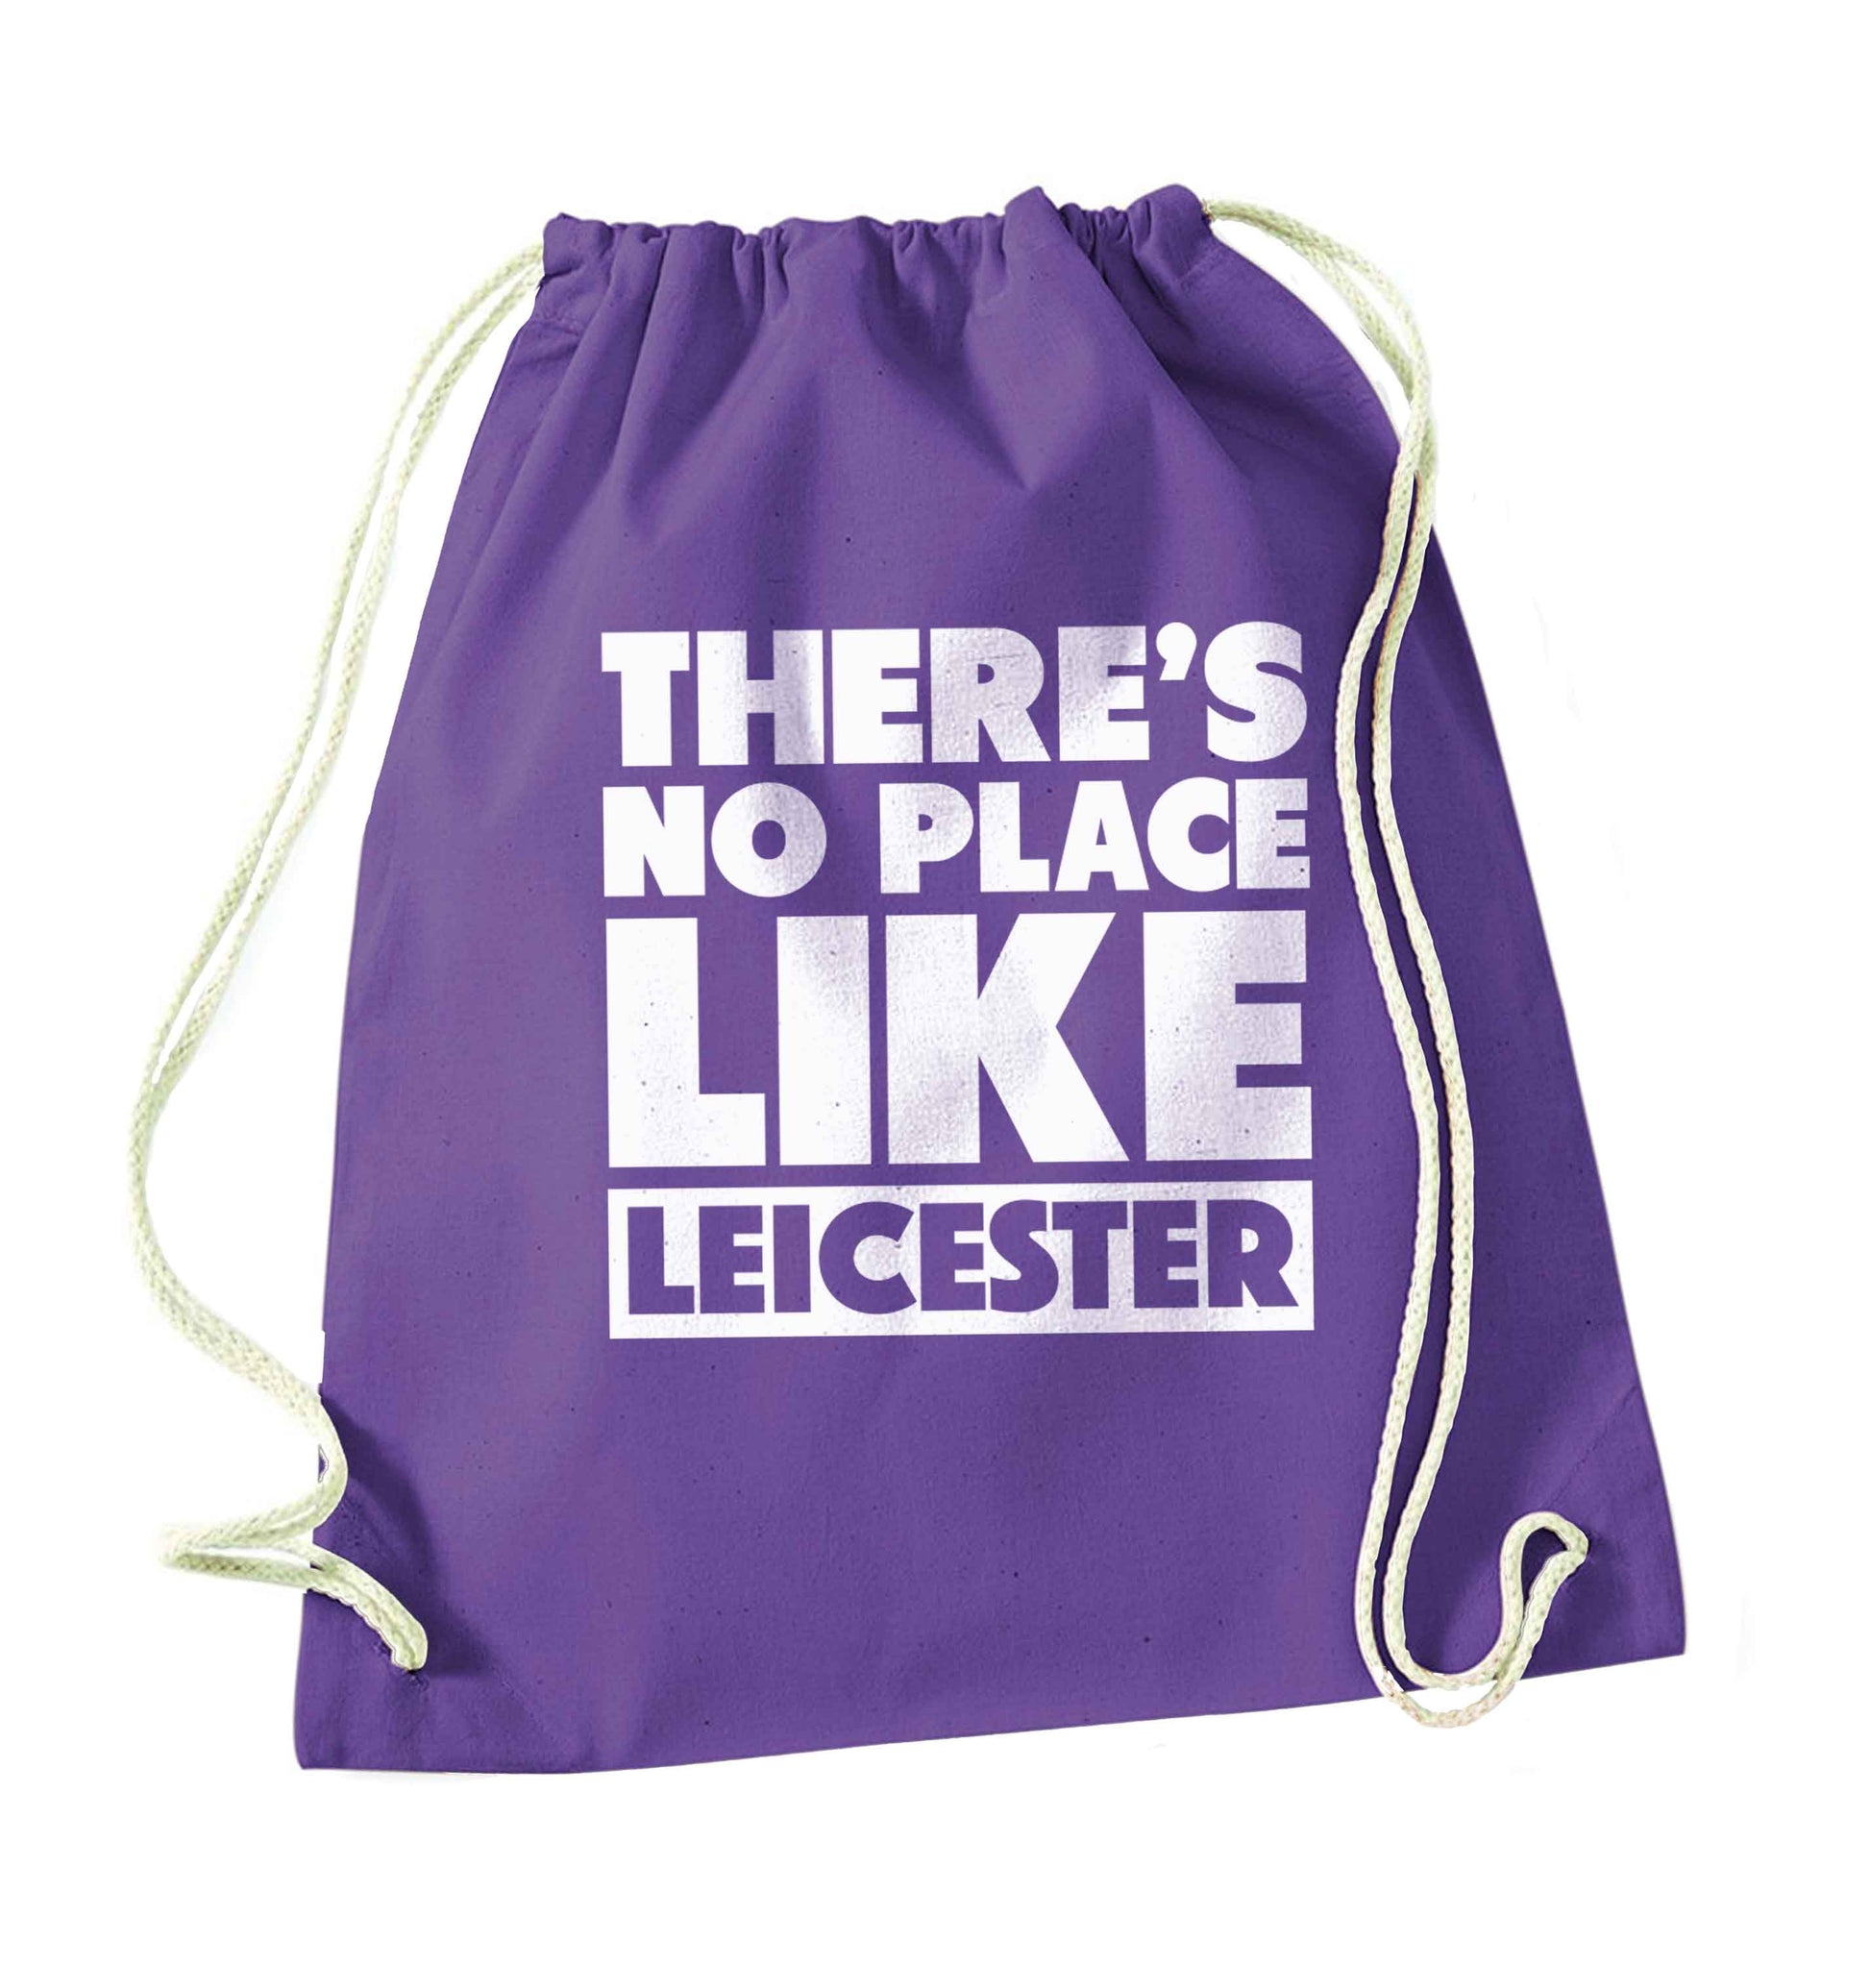 There's no place like Leicester purple drawstring bag